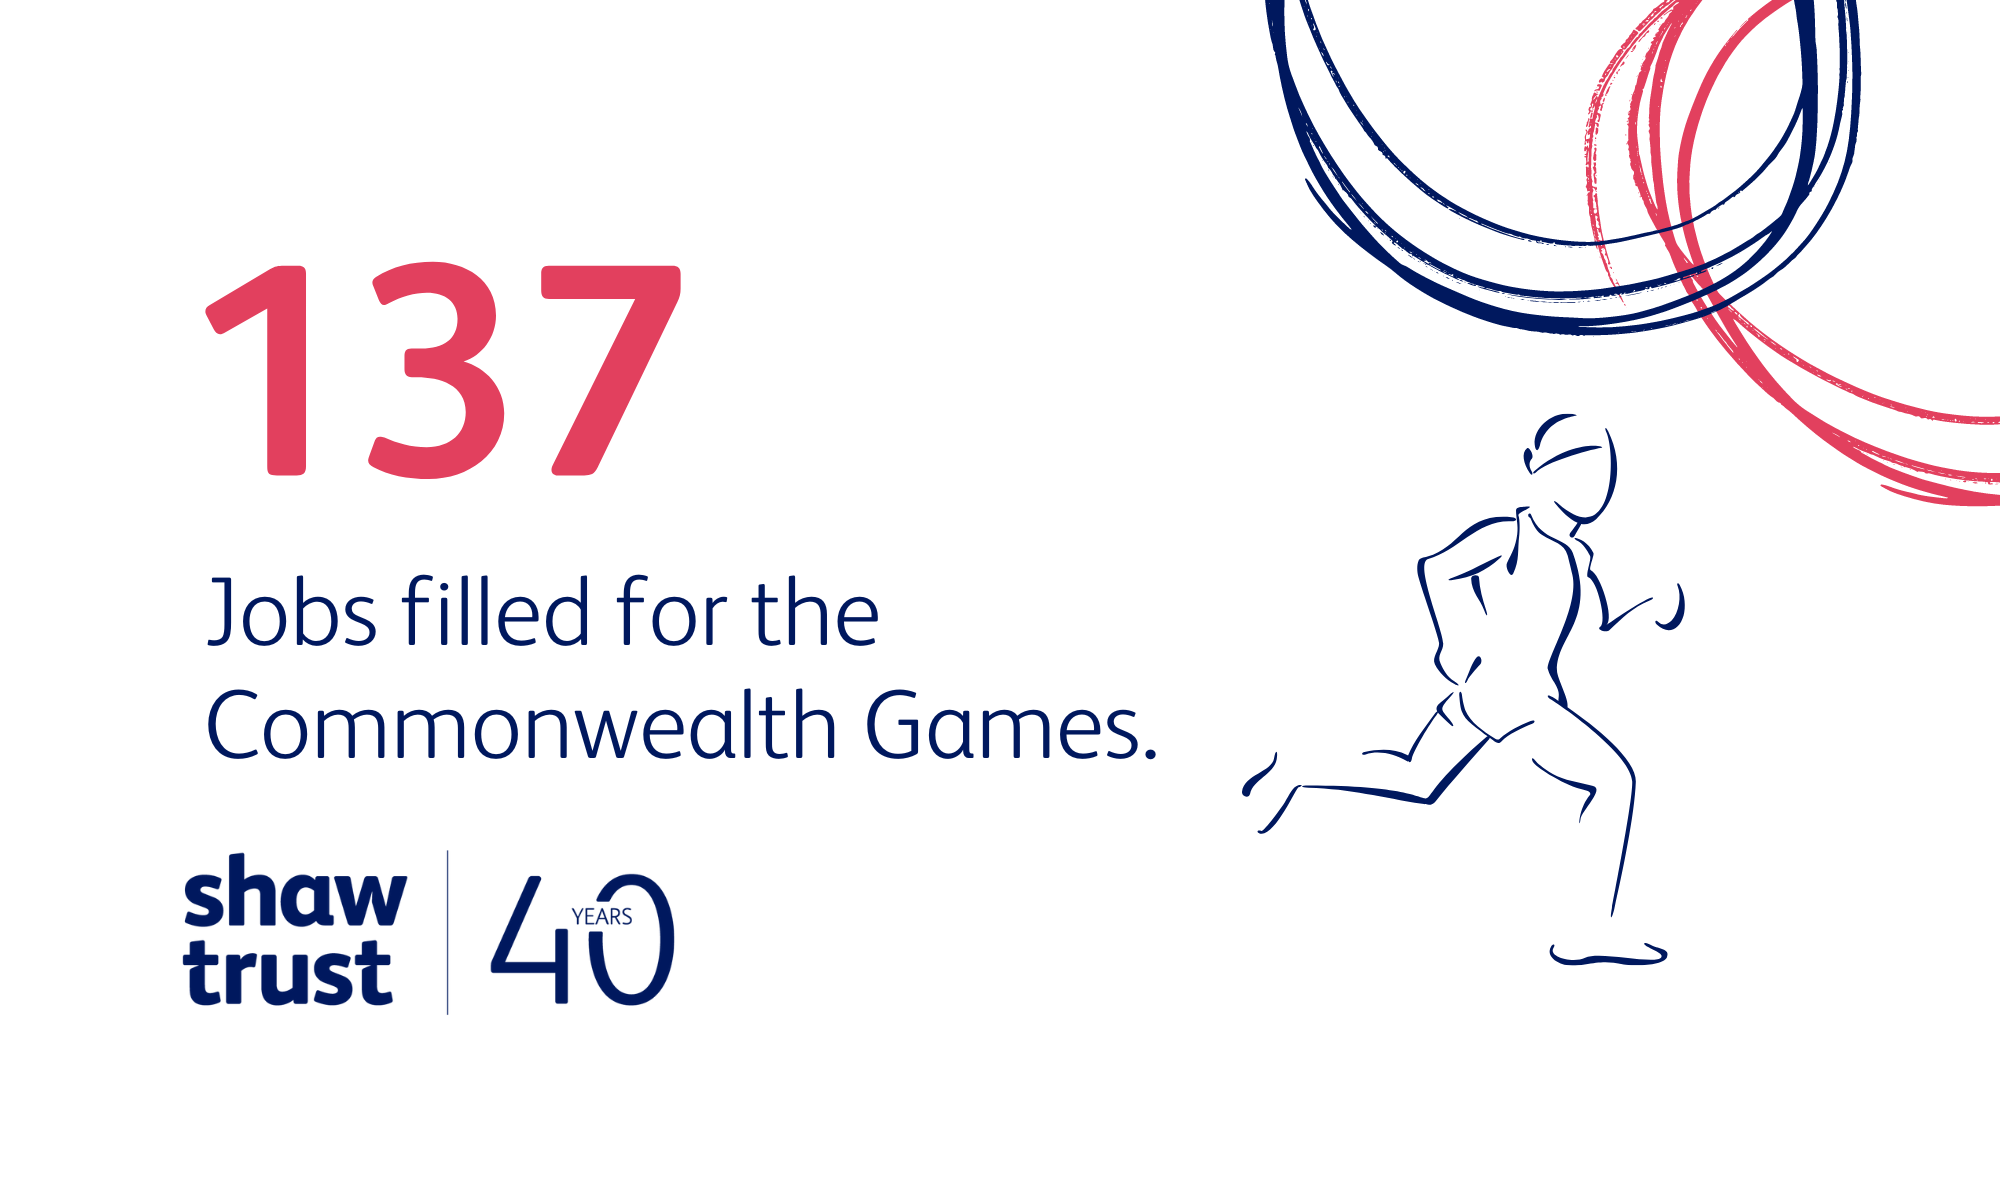 137 jobs filled for the Commonwealth Games.